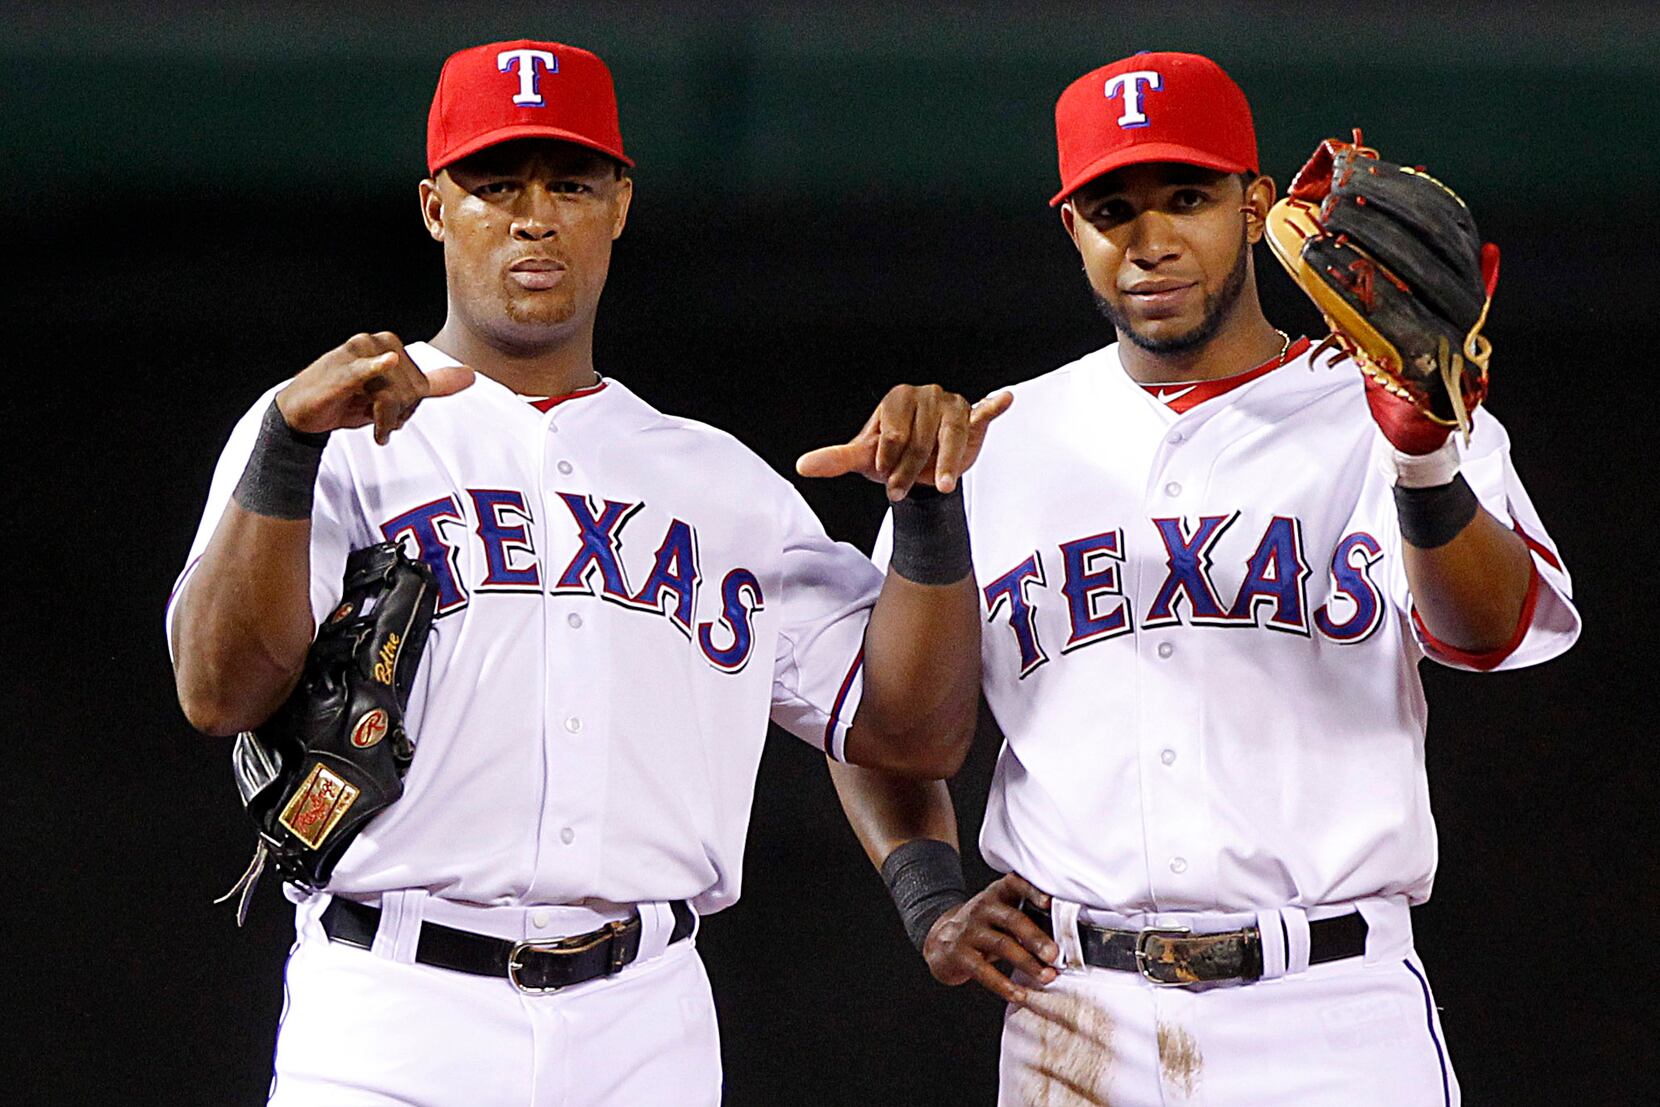 Adrian Beltre and Elvis Andrus figure out their boundaries, finally (Video)